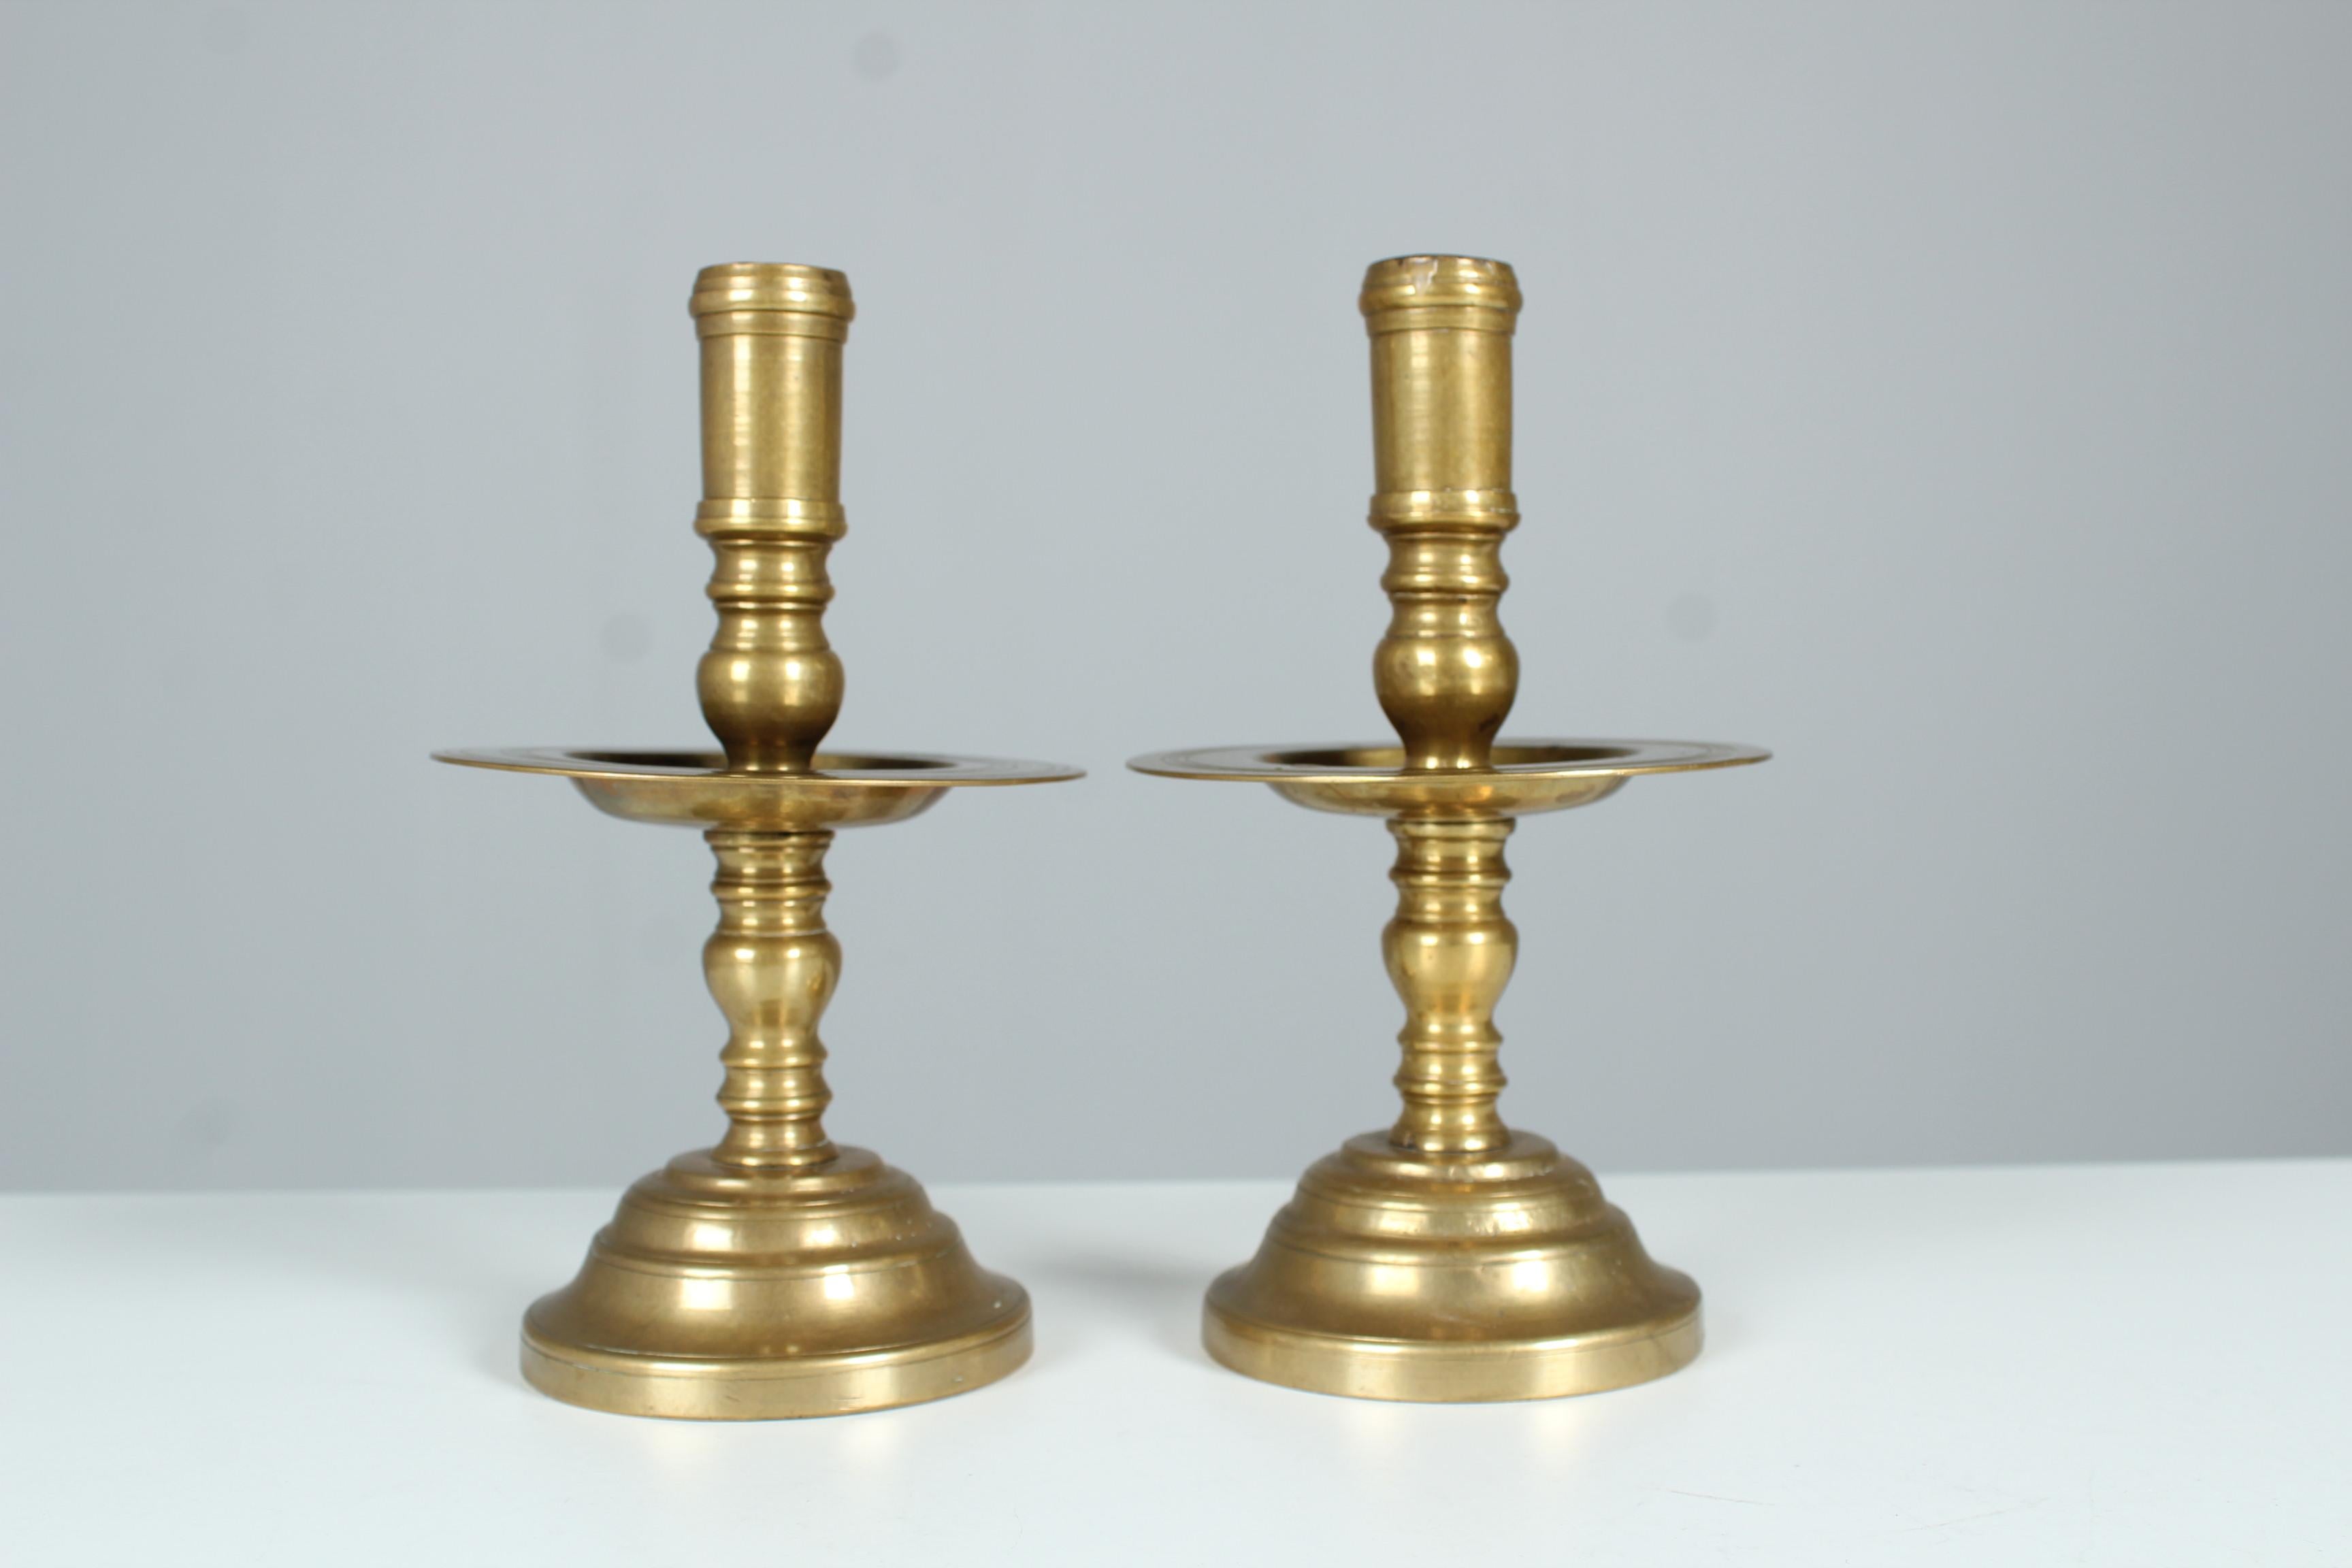 Great antique pair of brass candlesticks, gilded.
France, late 19th century.